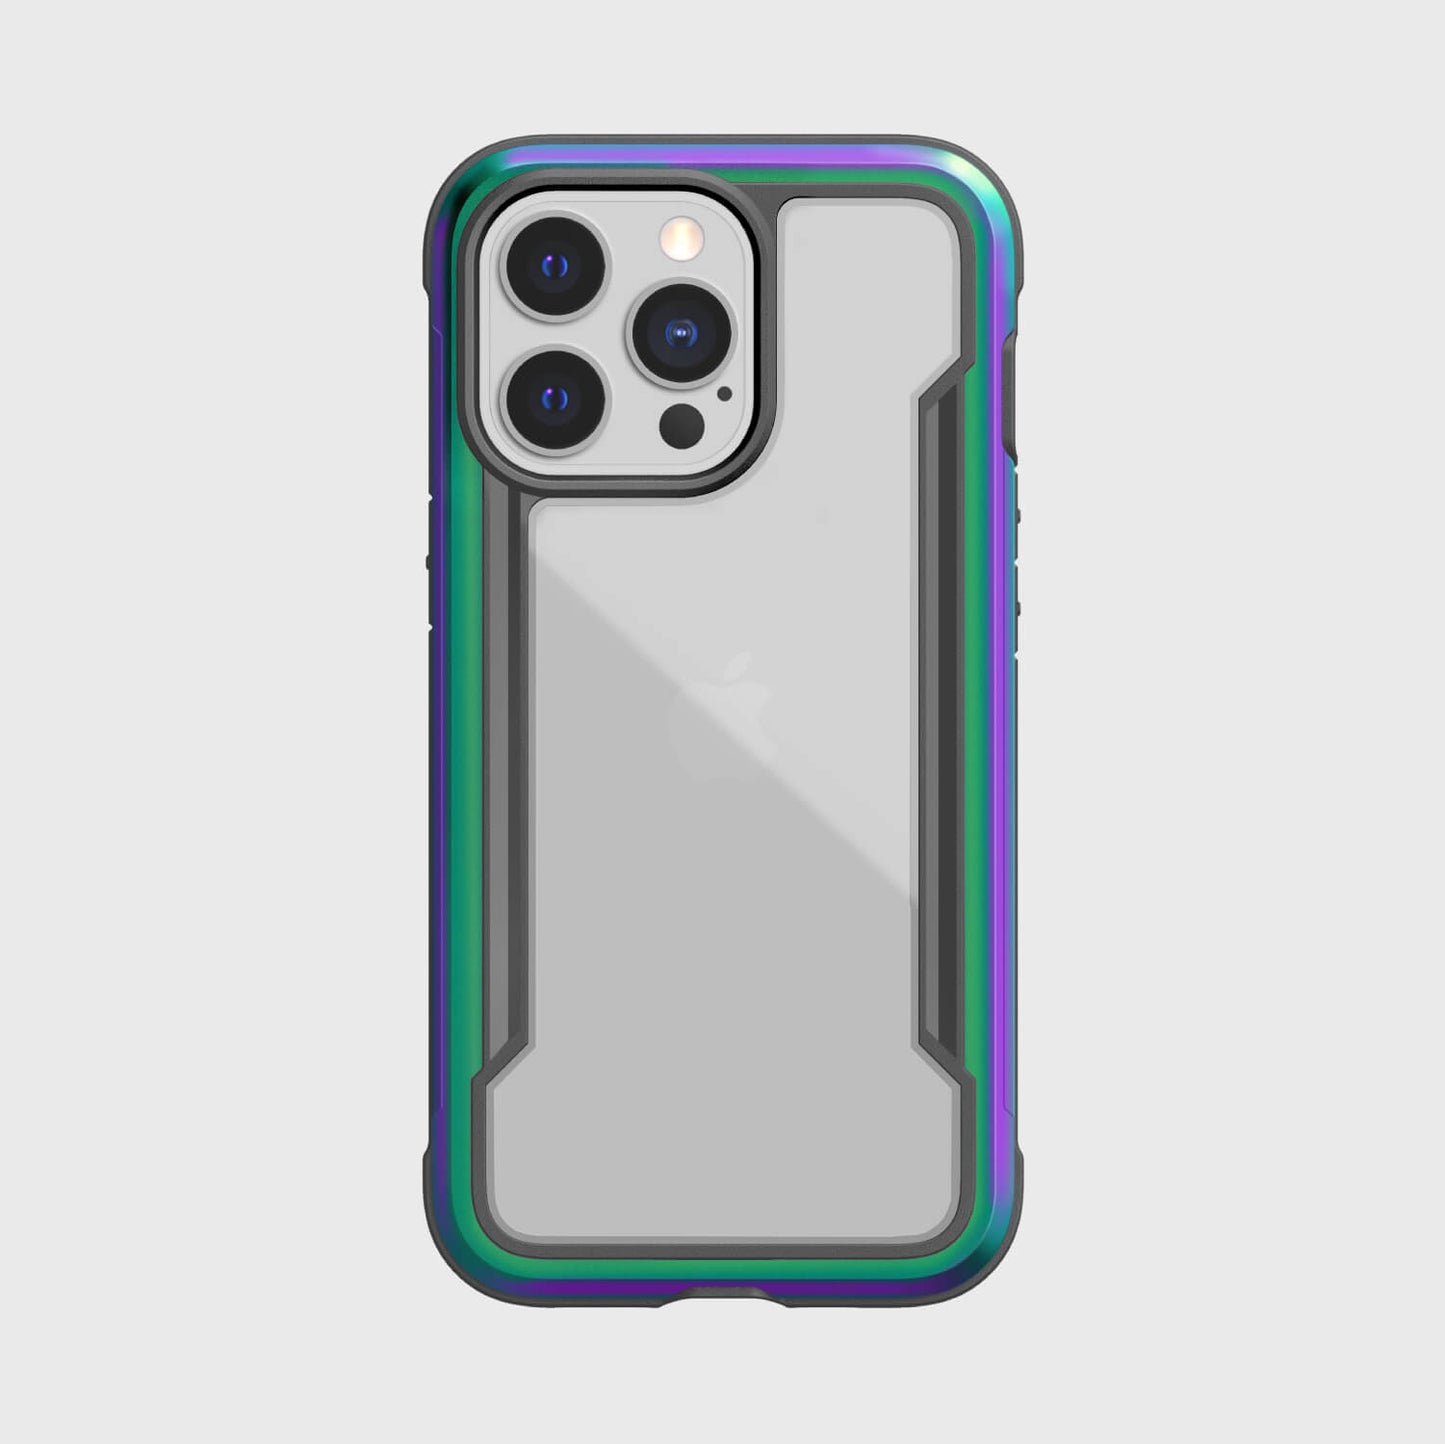 The iPhone 13 Pro Max case, Raptic Shield Pro, is shown in purple and green for enhanced drop protection.